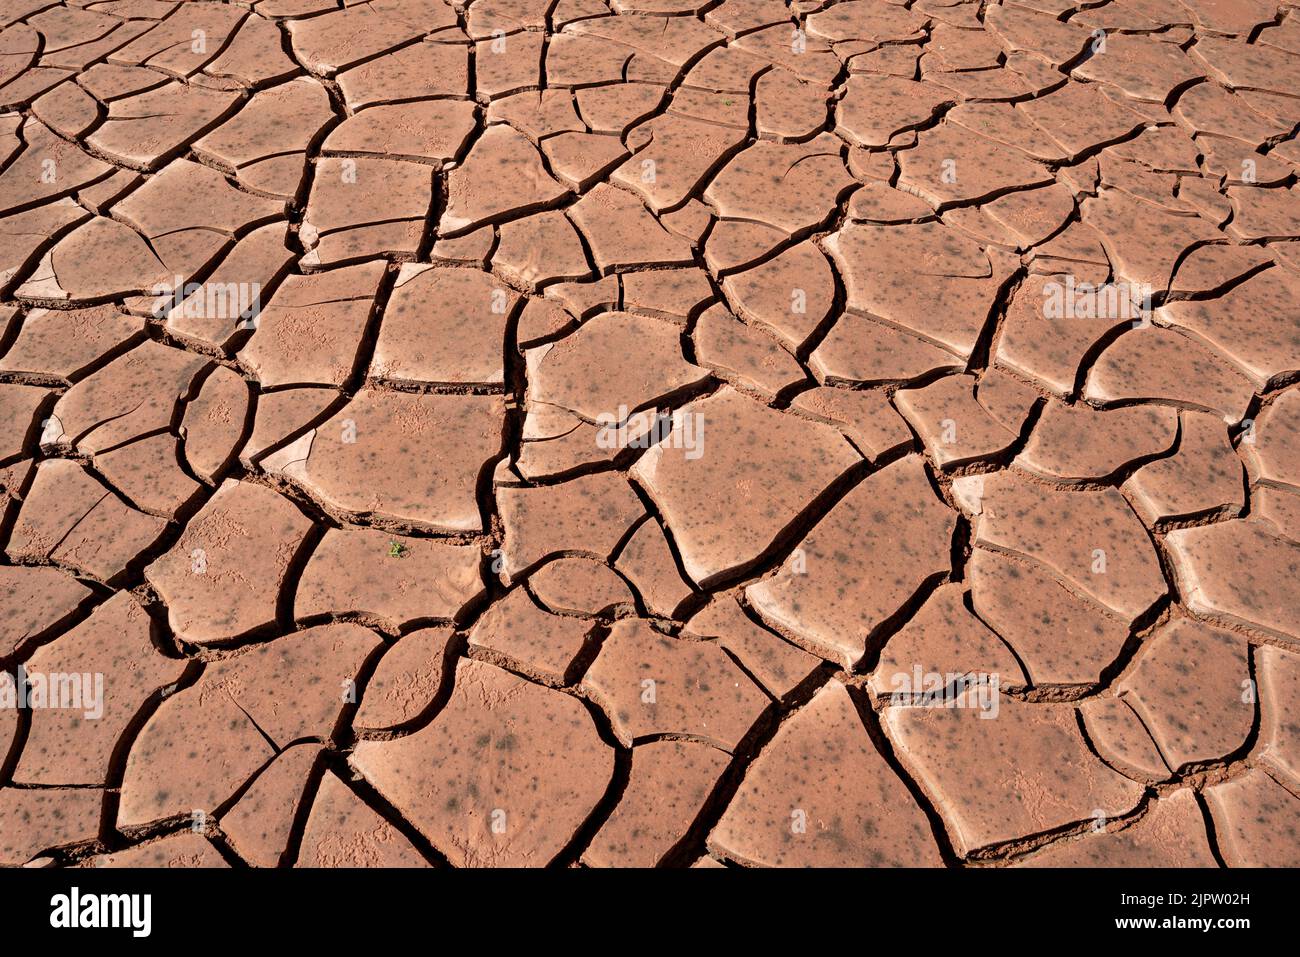 Cracks in drying silt along the Green River in Canyonlands National Park, Utah. Stock Photo